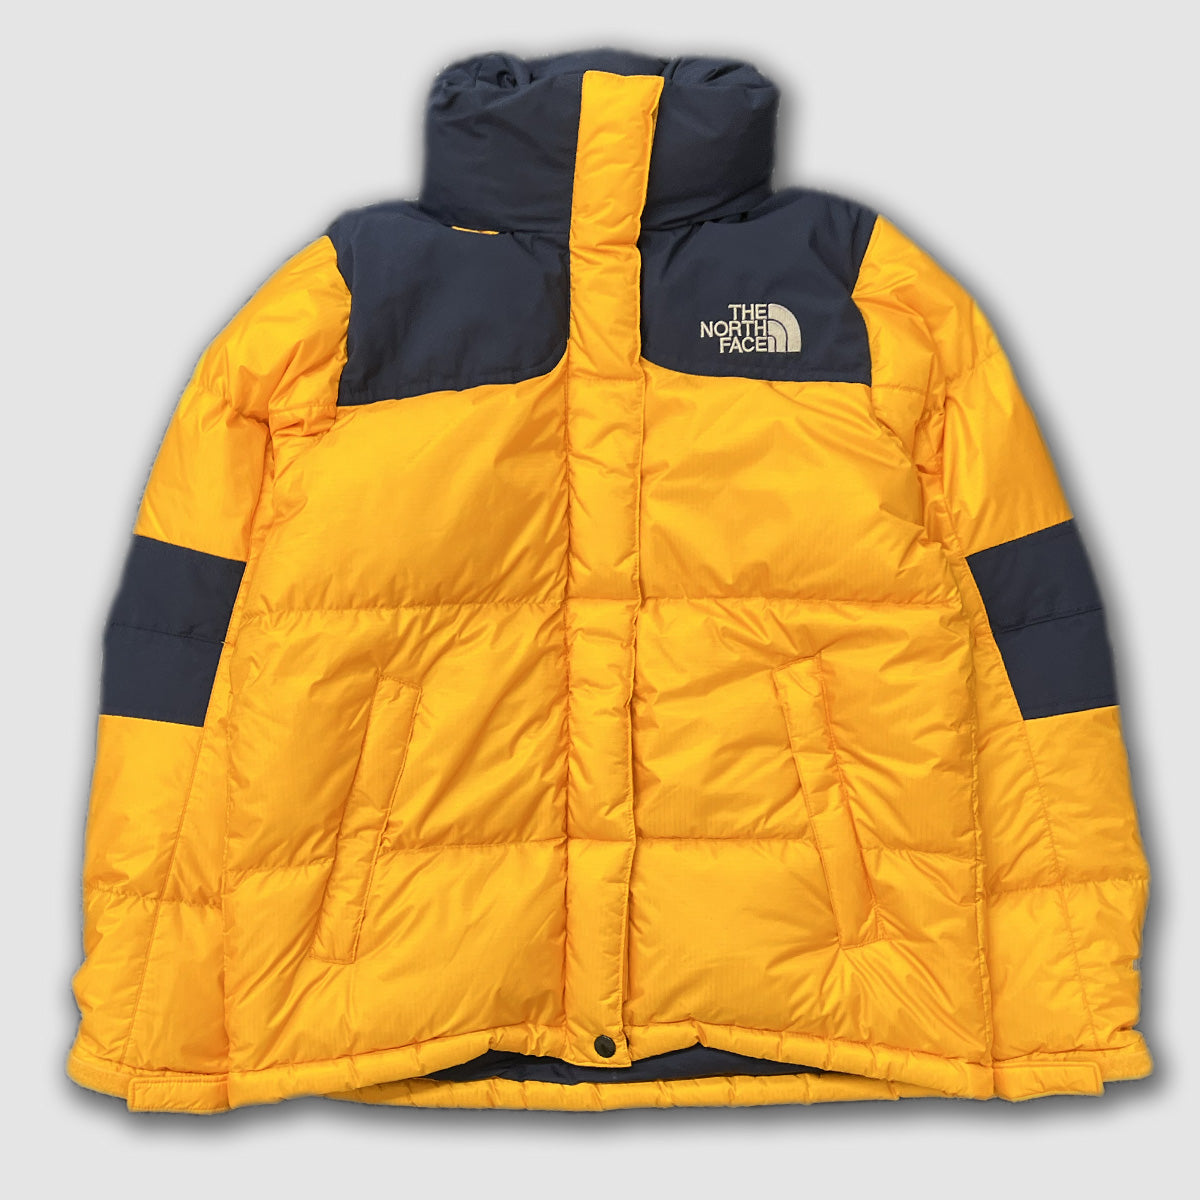 10047【THE NORTH FACE】ザノースフェイス SUMMIT SERIES 700 WIND STOPPER 90S バルトロ イエロー  85